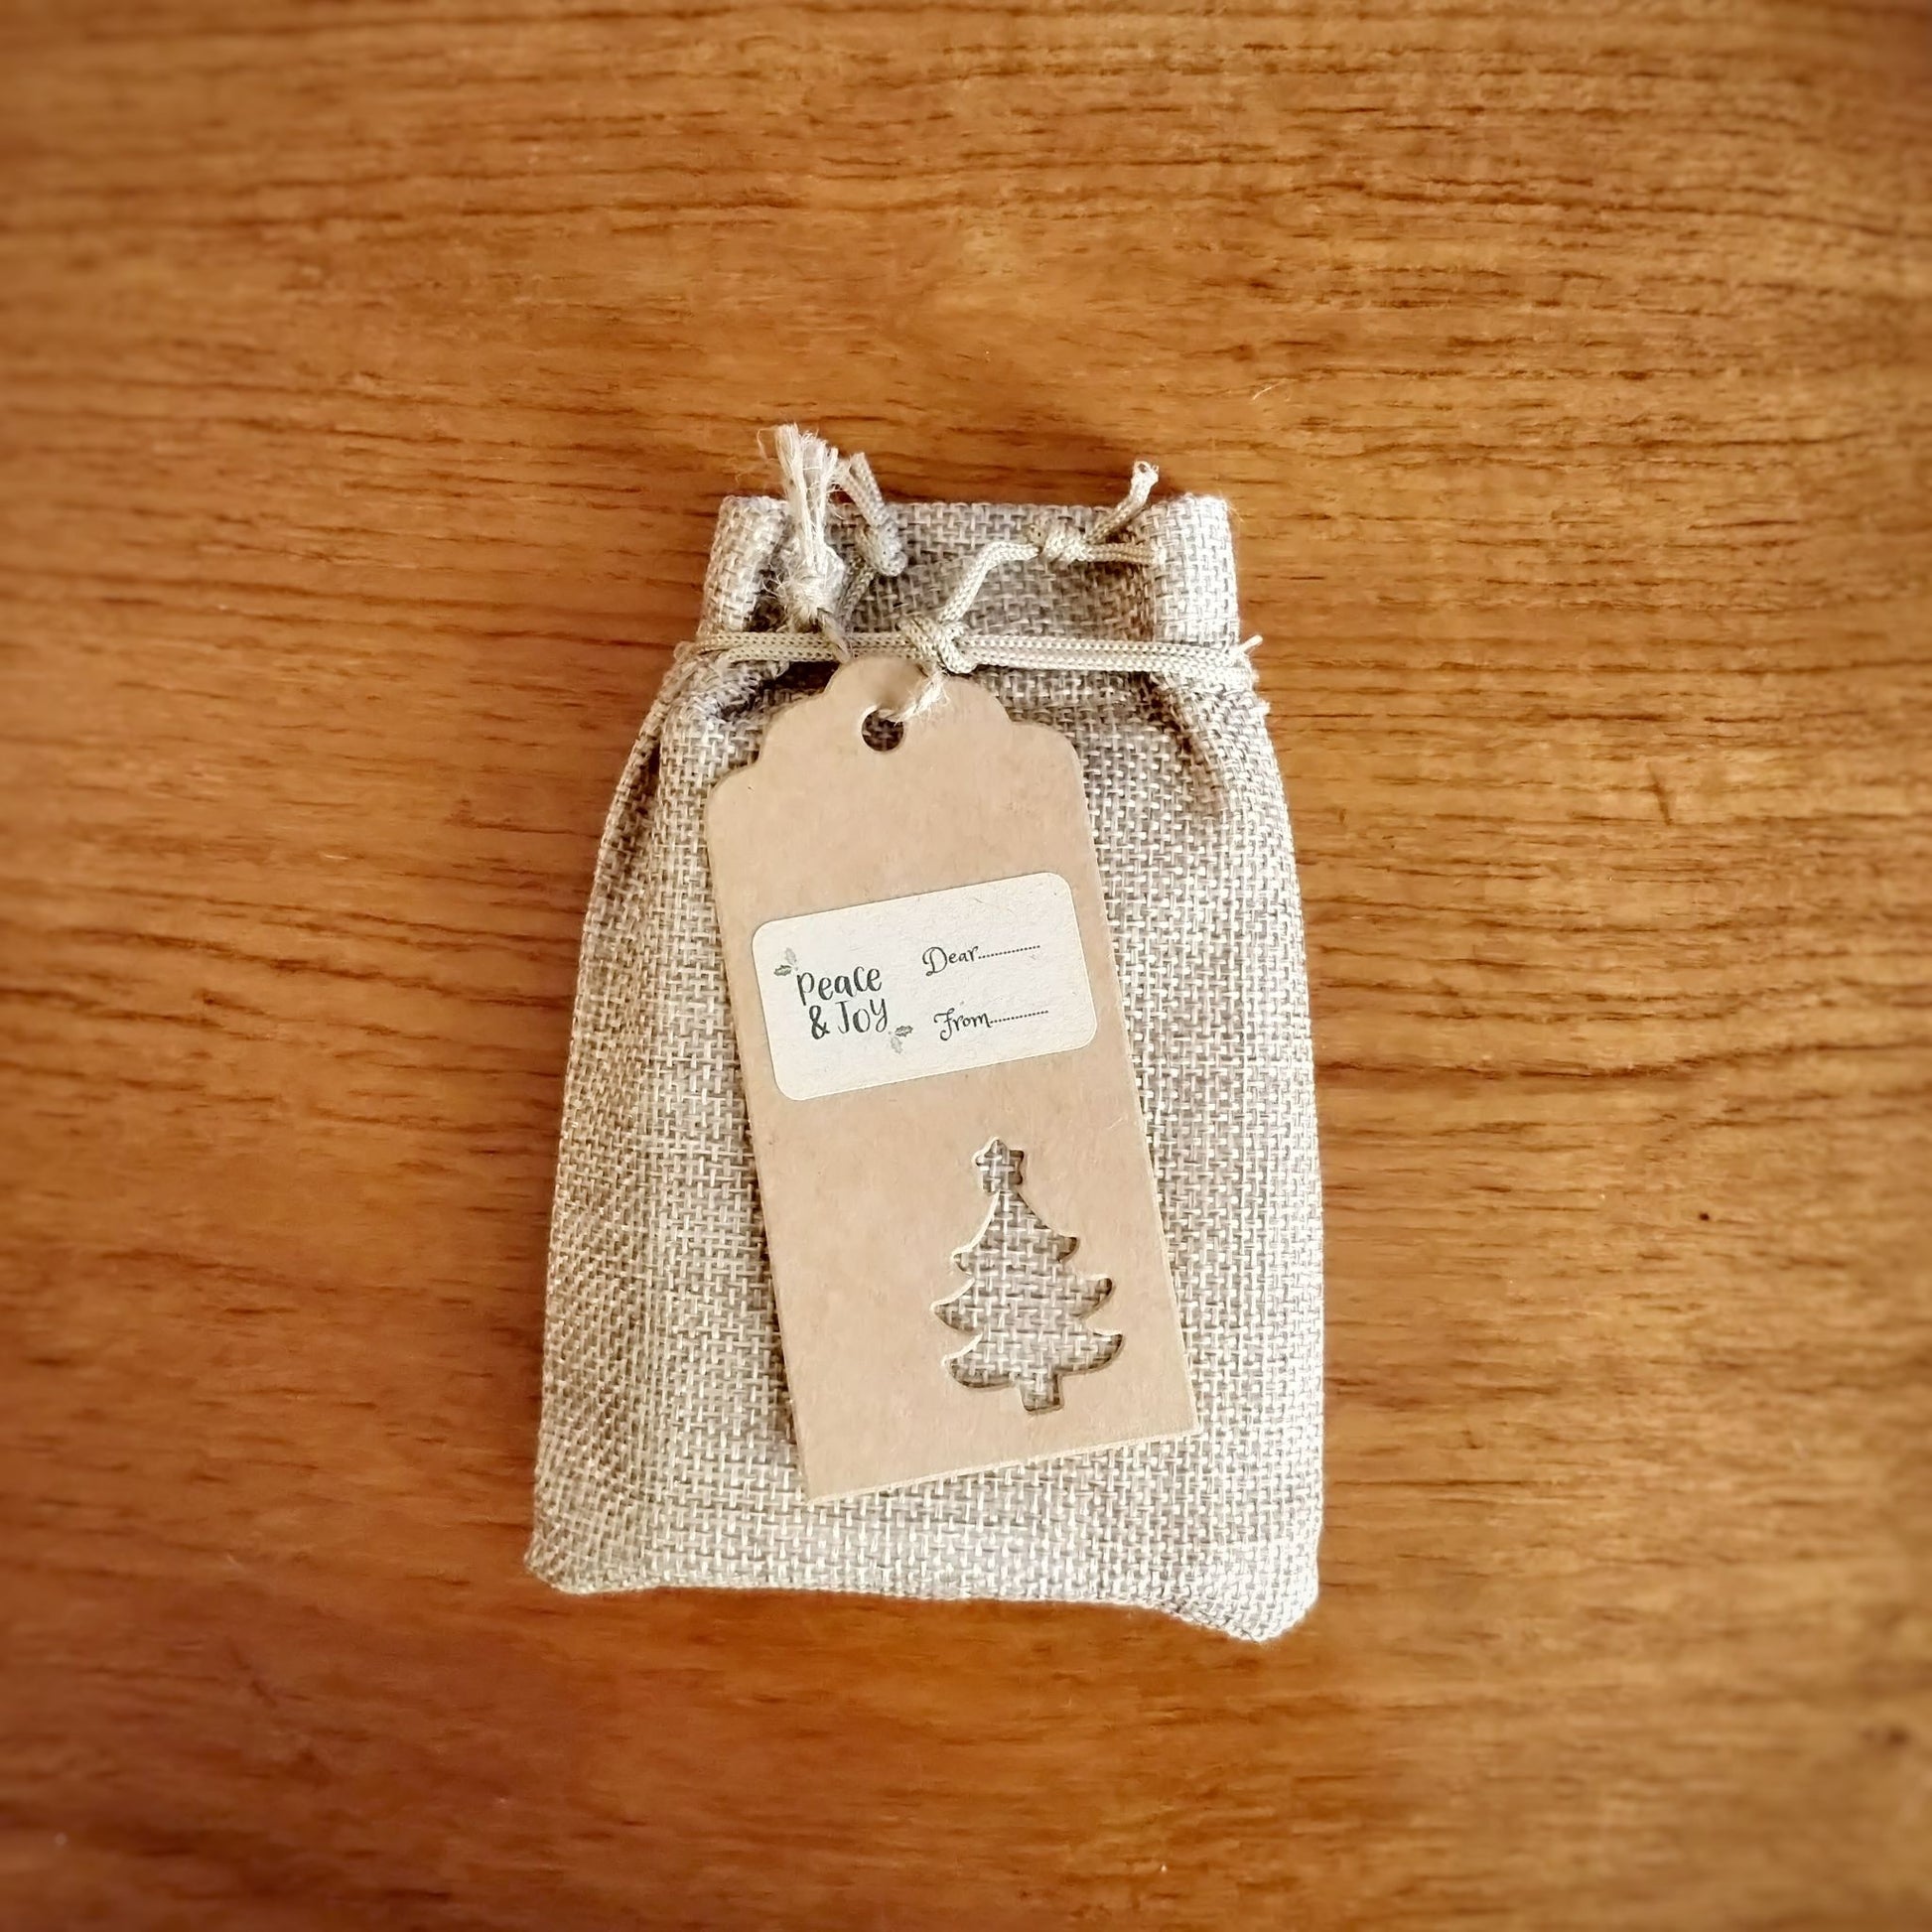 Wildflower Seed Gift Set - jute bag and five wildflower seed packets - Christmas gift set in jute bag